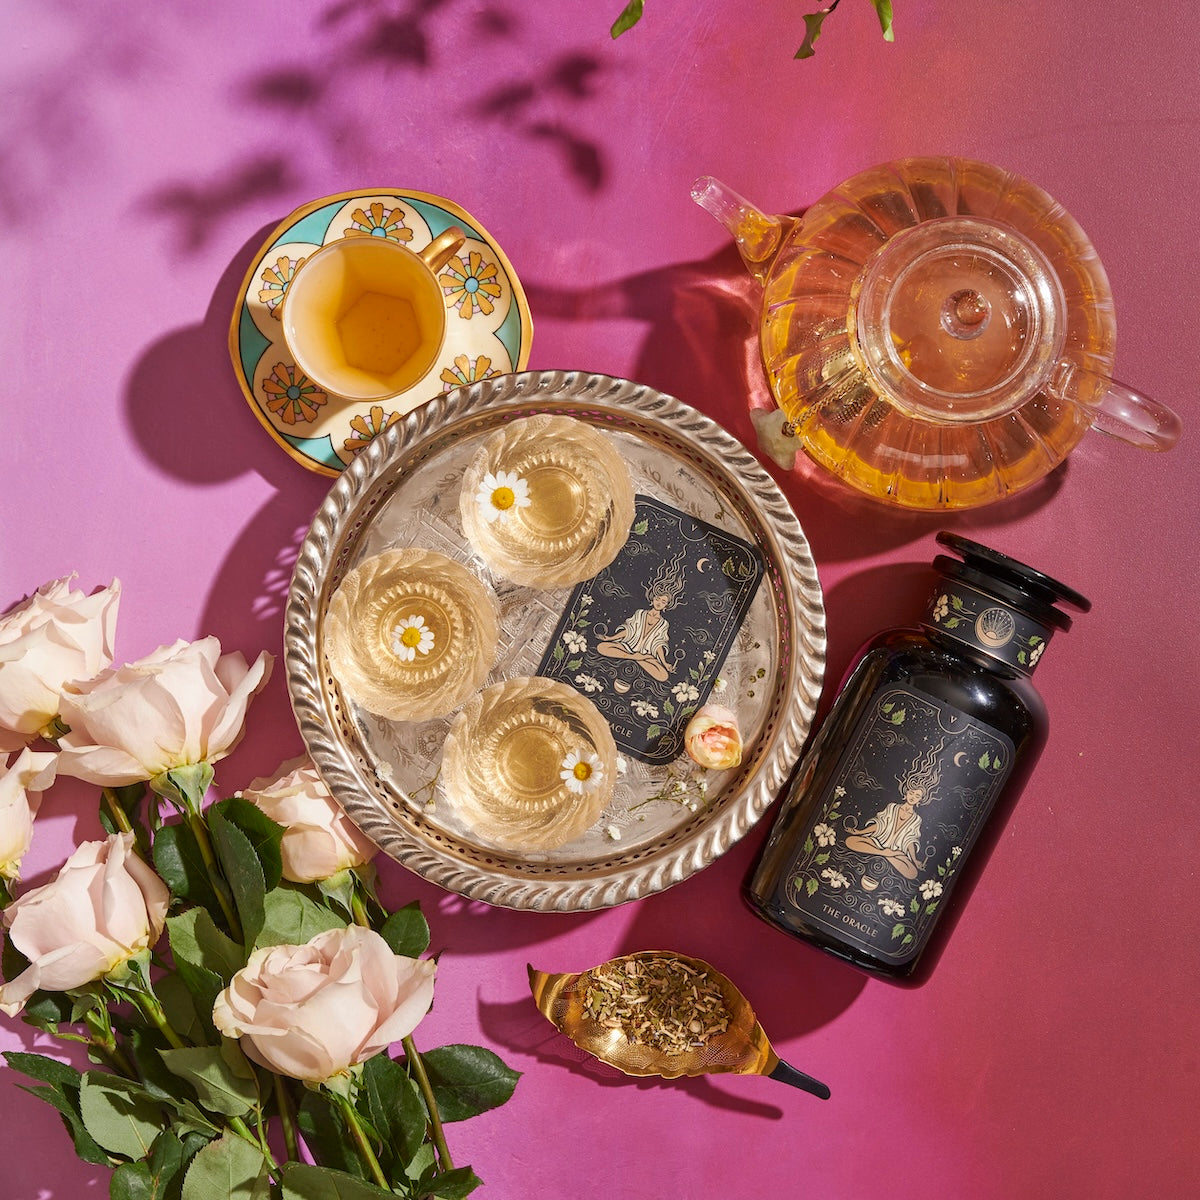 A decorative tea setting featuring a teapot filled with amber-colored tea, a floral-patterned teacup on a saucer, a black canister with elegant floral designs, and a round silver tray with two ornate tea glasses. Surrounding the setup are fresh roses and the Magic Hour Monthly Magic 3-Month Tea Subscription Box.